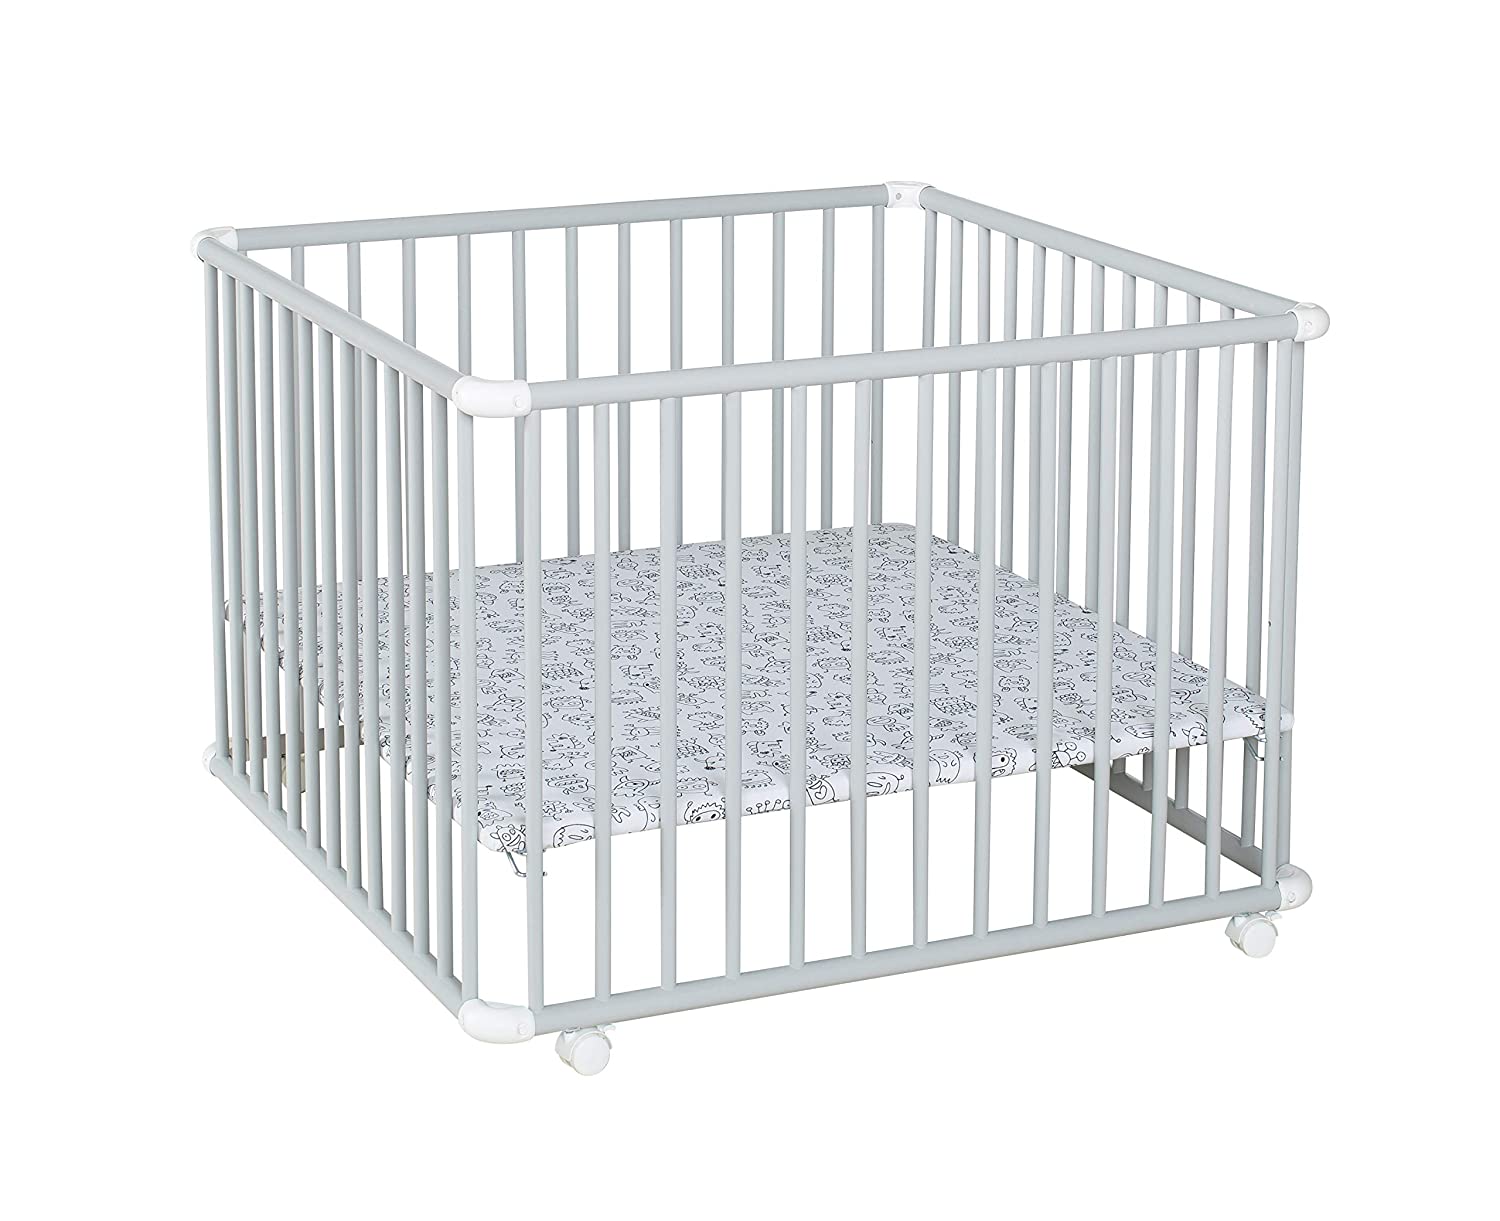 Geuther Belami Plus Playpen - Easy to Disassemble Playpen - TÜV Tested - Made of Natural Wood - Grey - Size: 76 cm x 97 cm